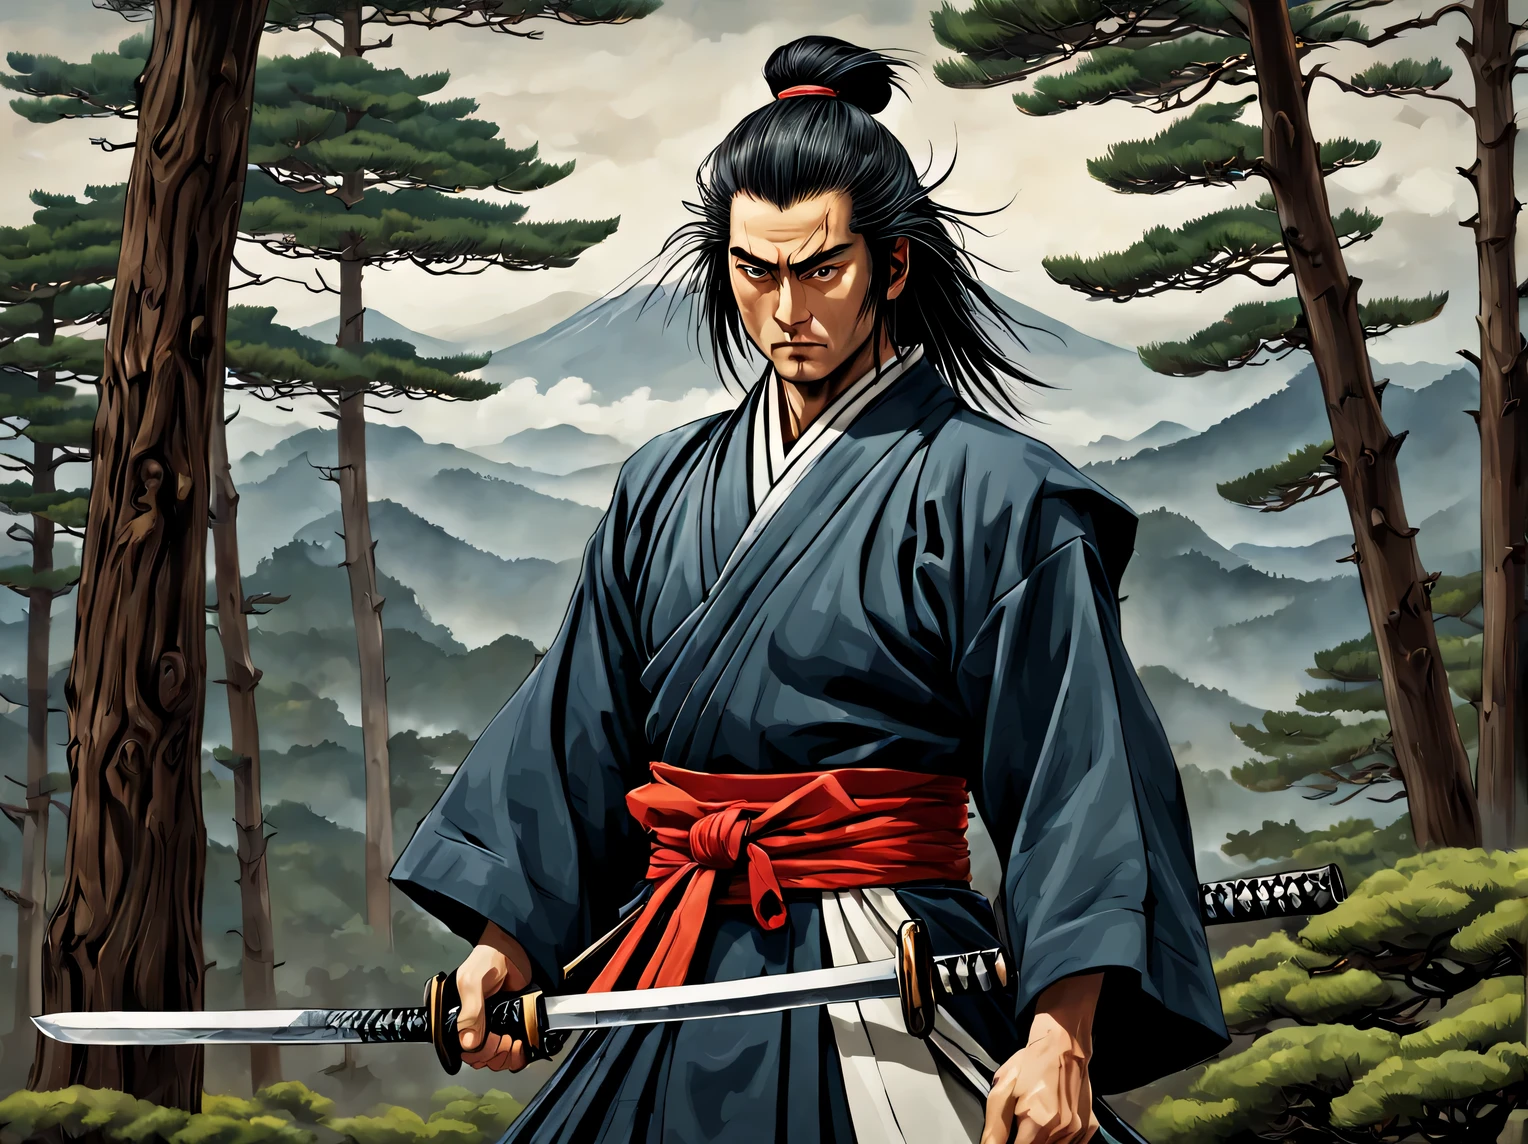 The neural network draws a picture against the backdrop of Fuji and Japanese pine trees, heroic creature - proud samurai, holding a samurai katana sword, samurai clothing, slim slim physique, Developed muscles, loose hair, High detail, clarity 32 thousand., A high resolution, -bit color depth, (Mark Rayden: 1.1155), (Xue Wang: 1.1155), (Do it:1.255), a lot of details, Beautiful image